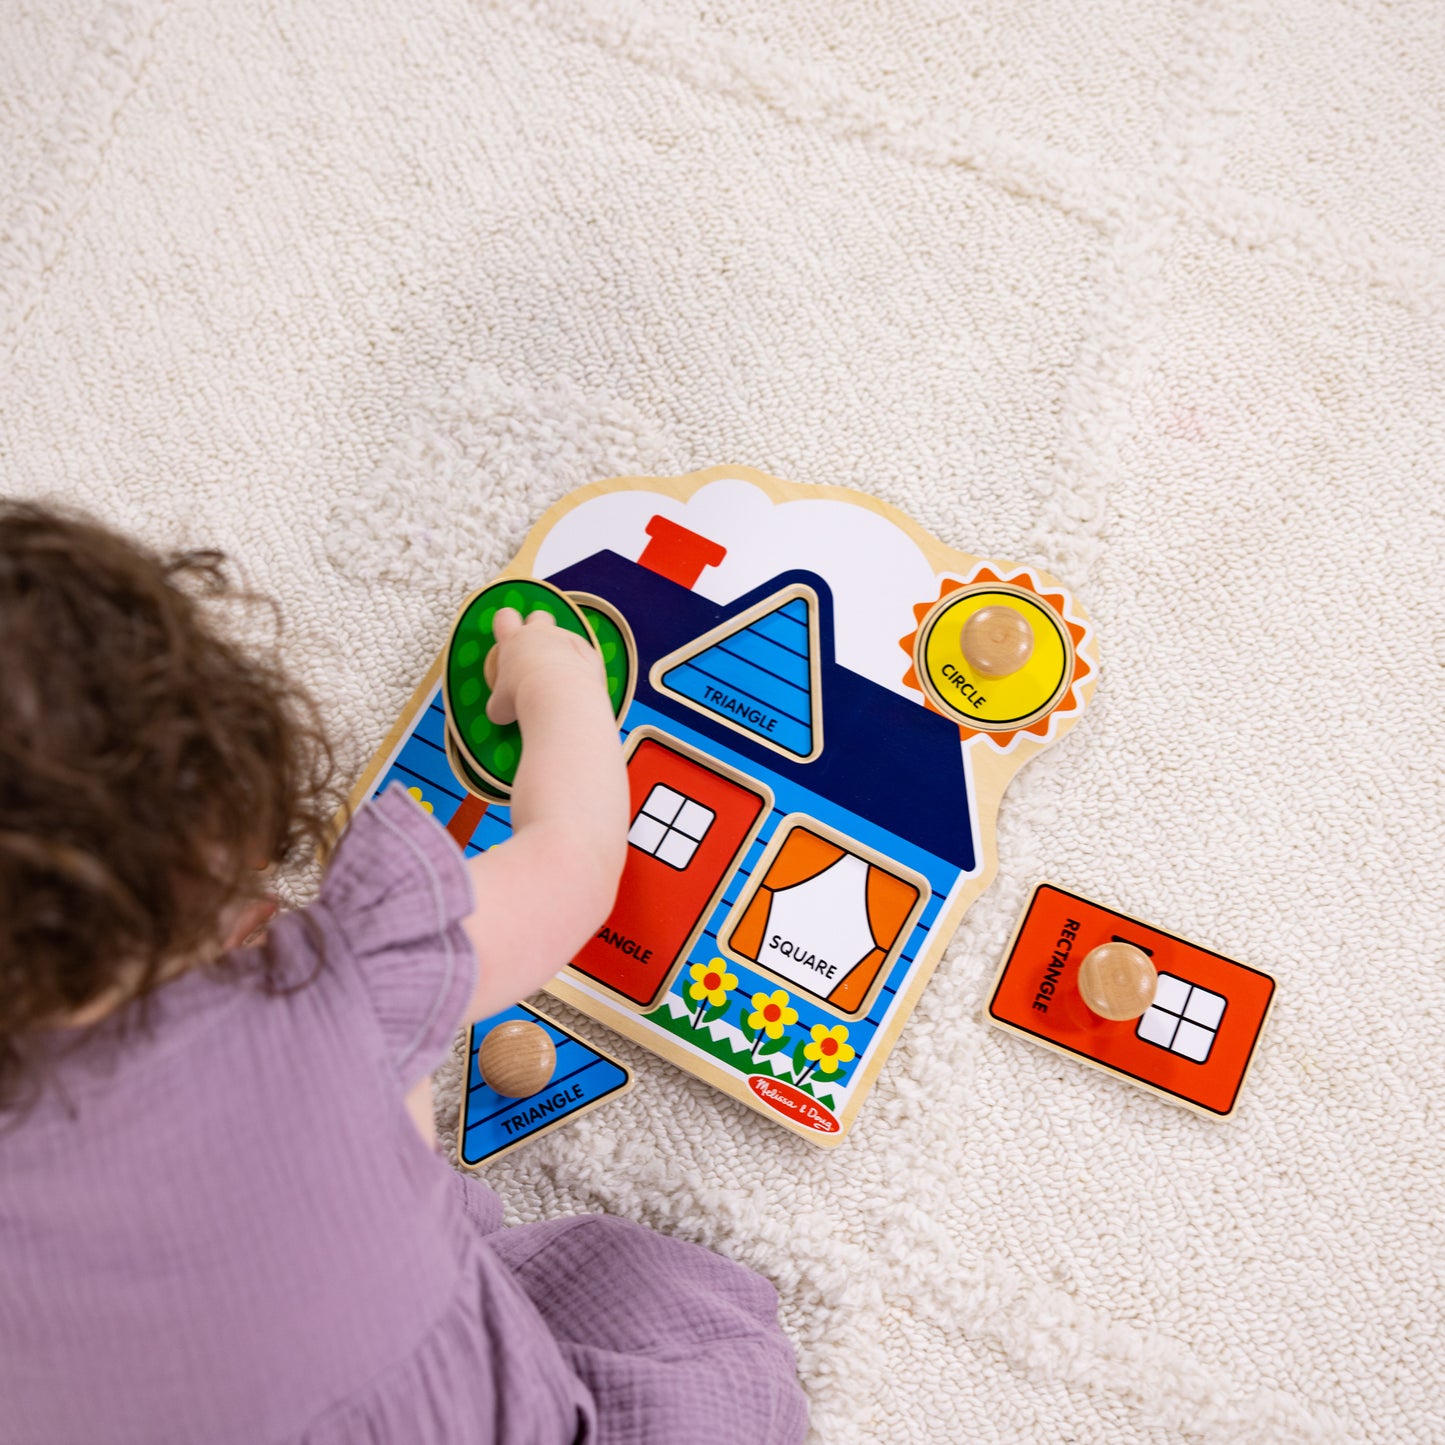 First Shapes Jumbo Knob Wooden Puzzle - 5 Pieces